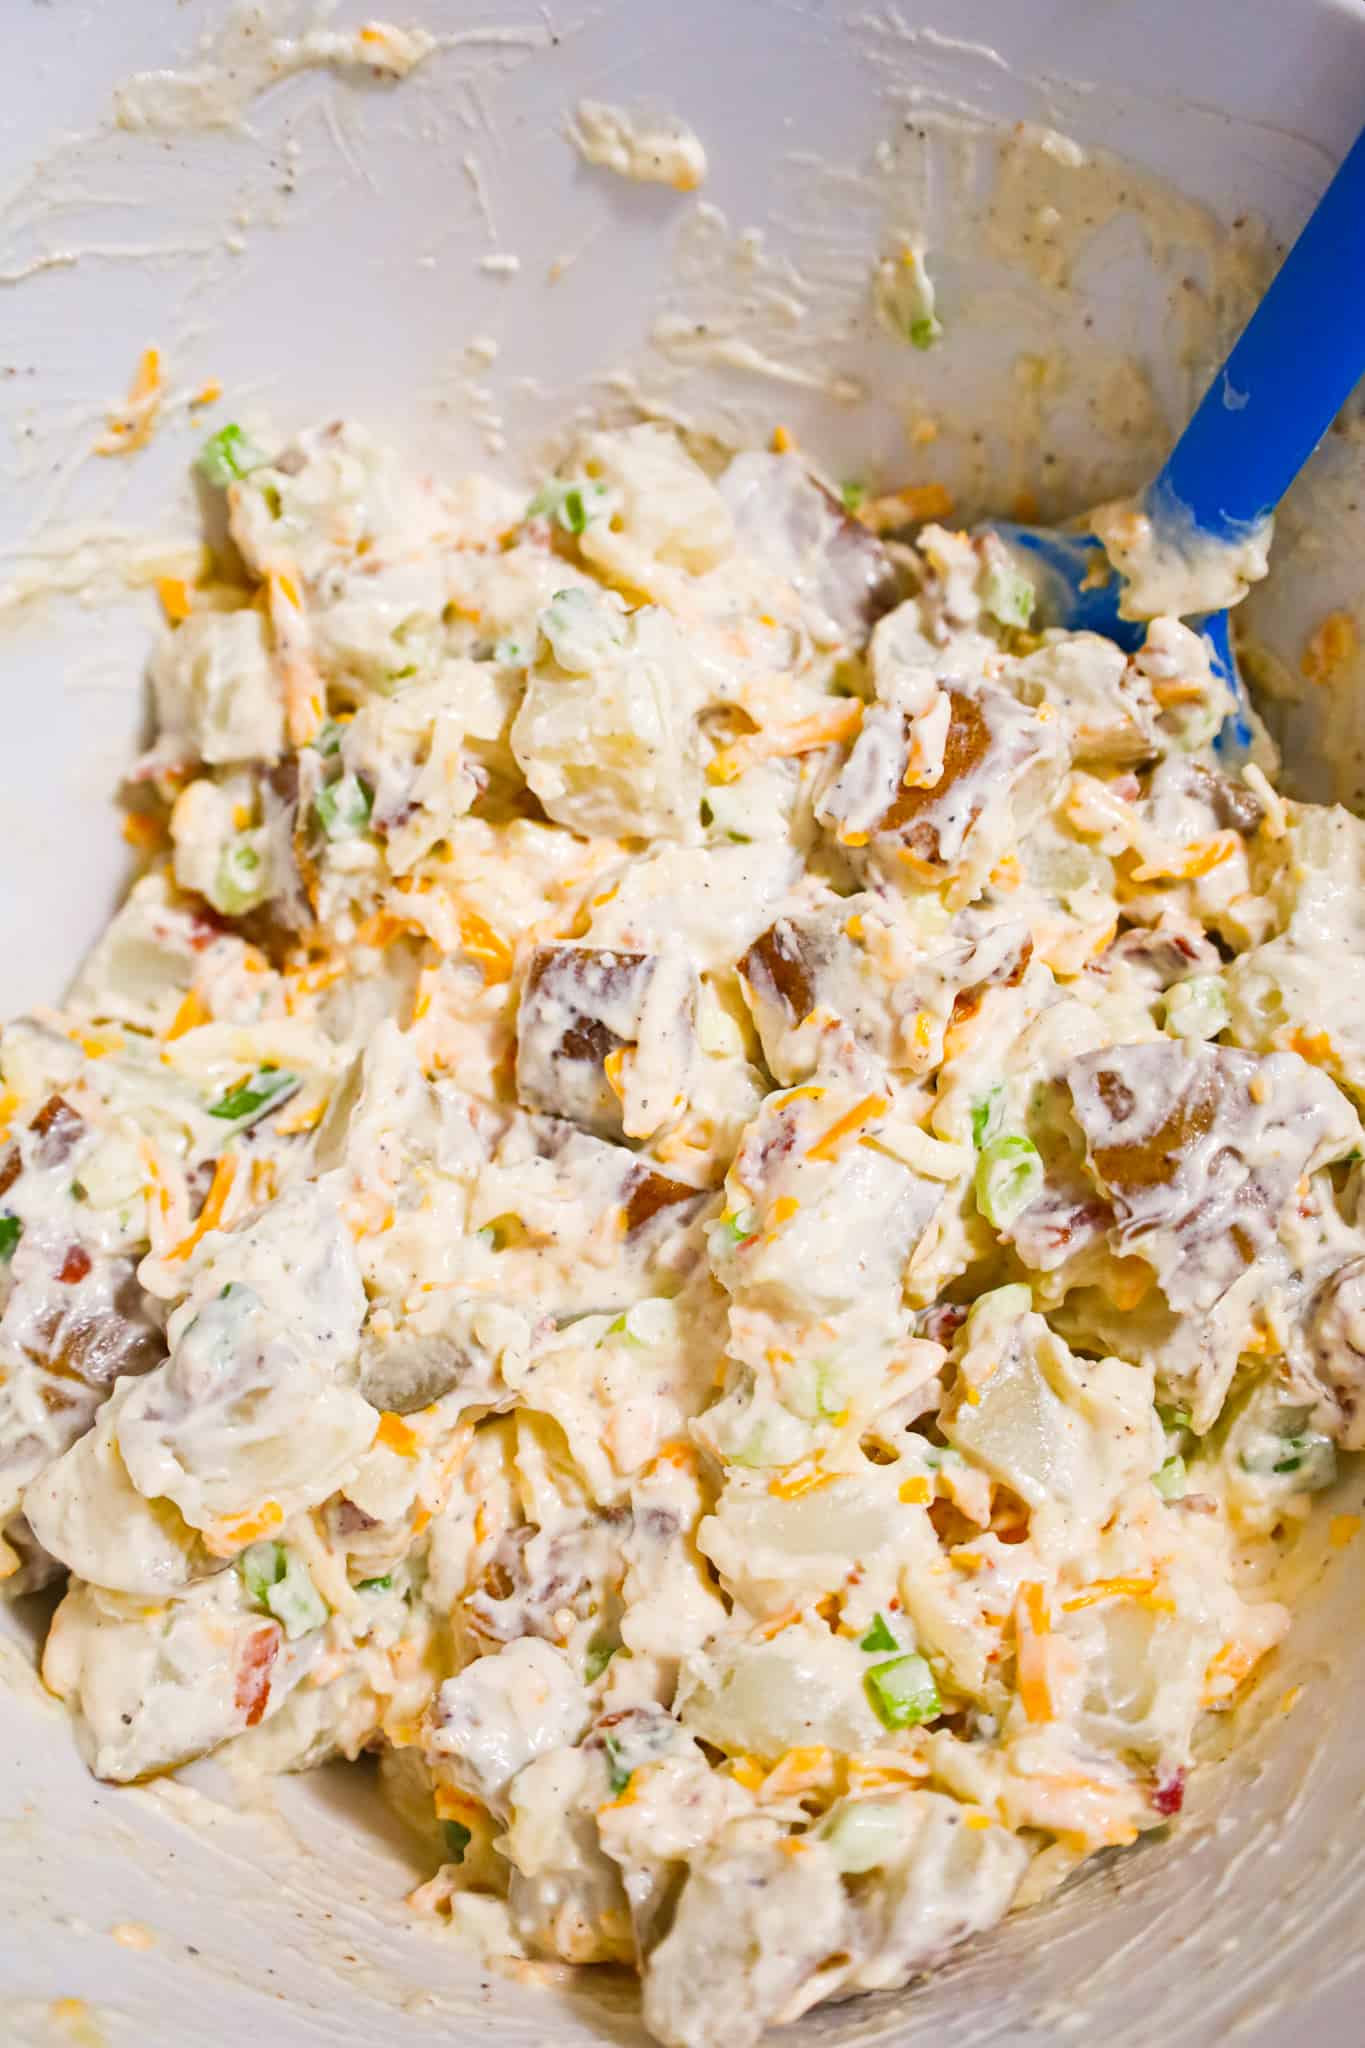 Loaded Baked Potato Salad is a delicious cold side dish recipe made with russet potatoes and loaded with mayo, sour cream, crumbled bacon, cheddar cheese and chopped green onions.